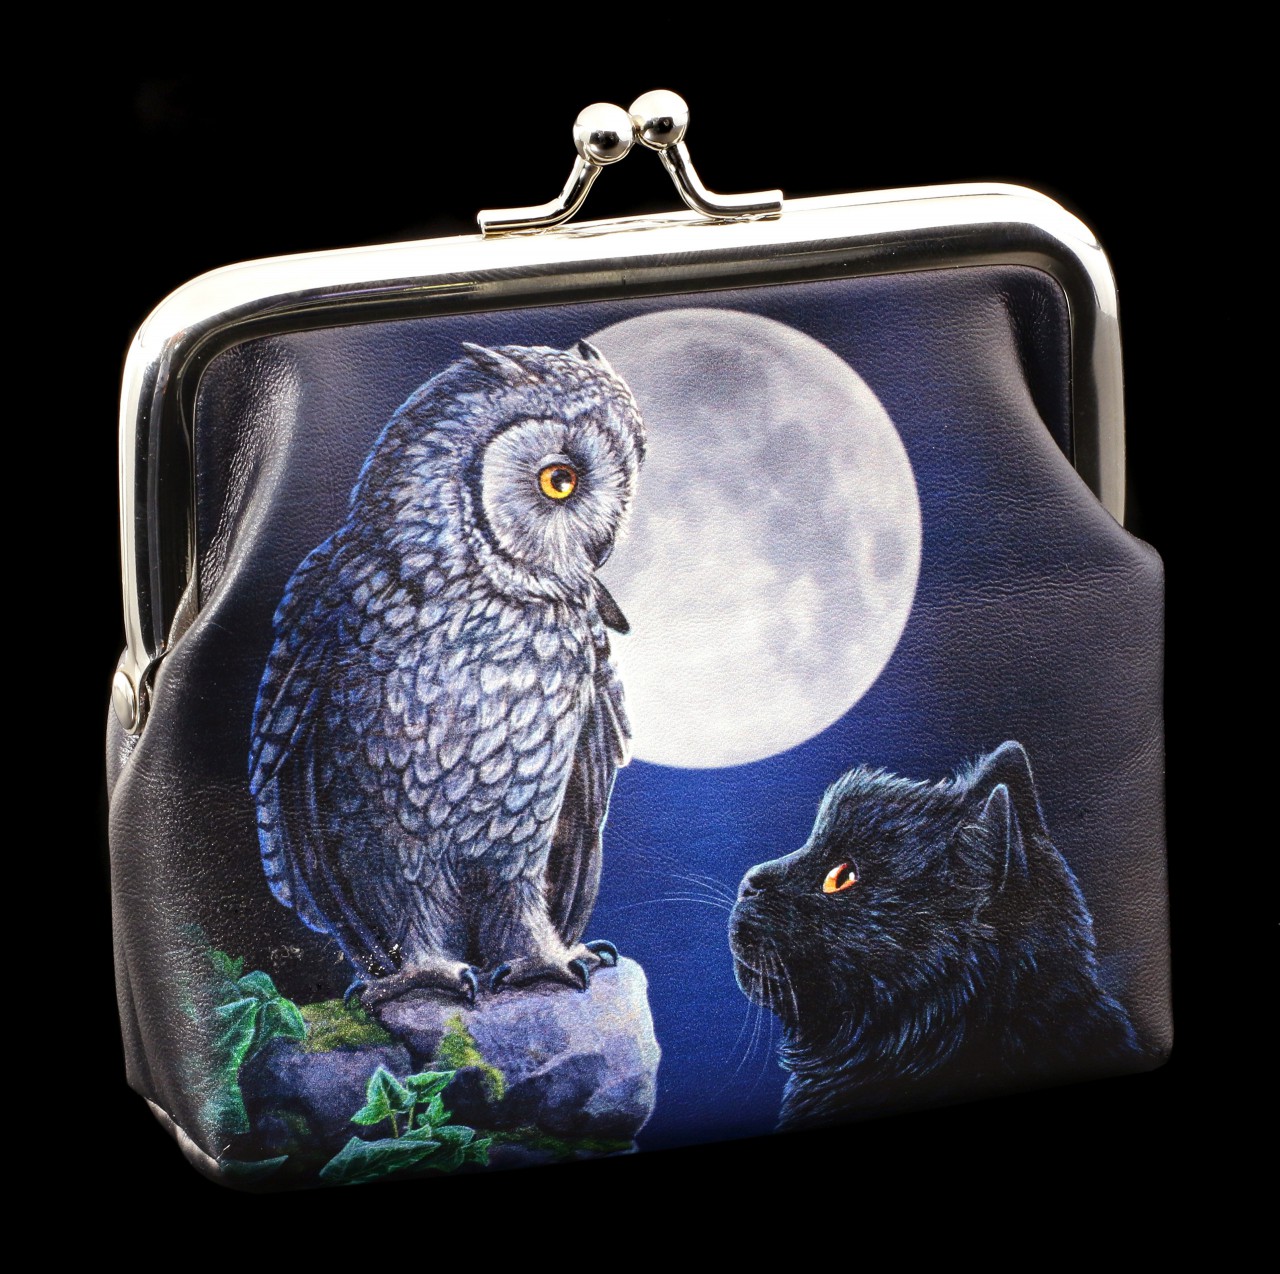 Coin Purse with Cat and Owl - Purrfect Wisdom